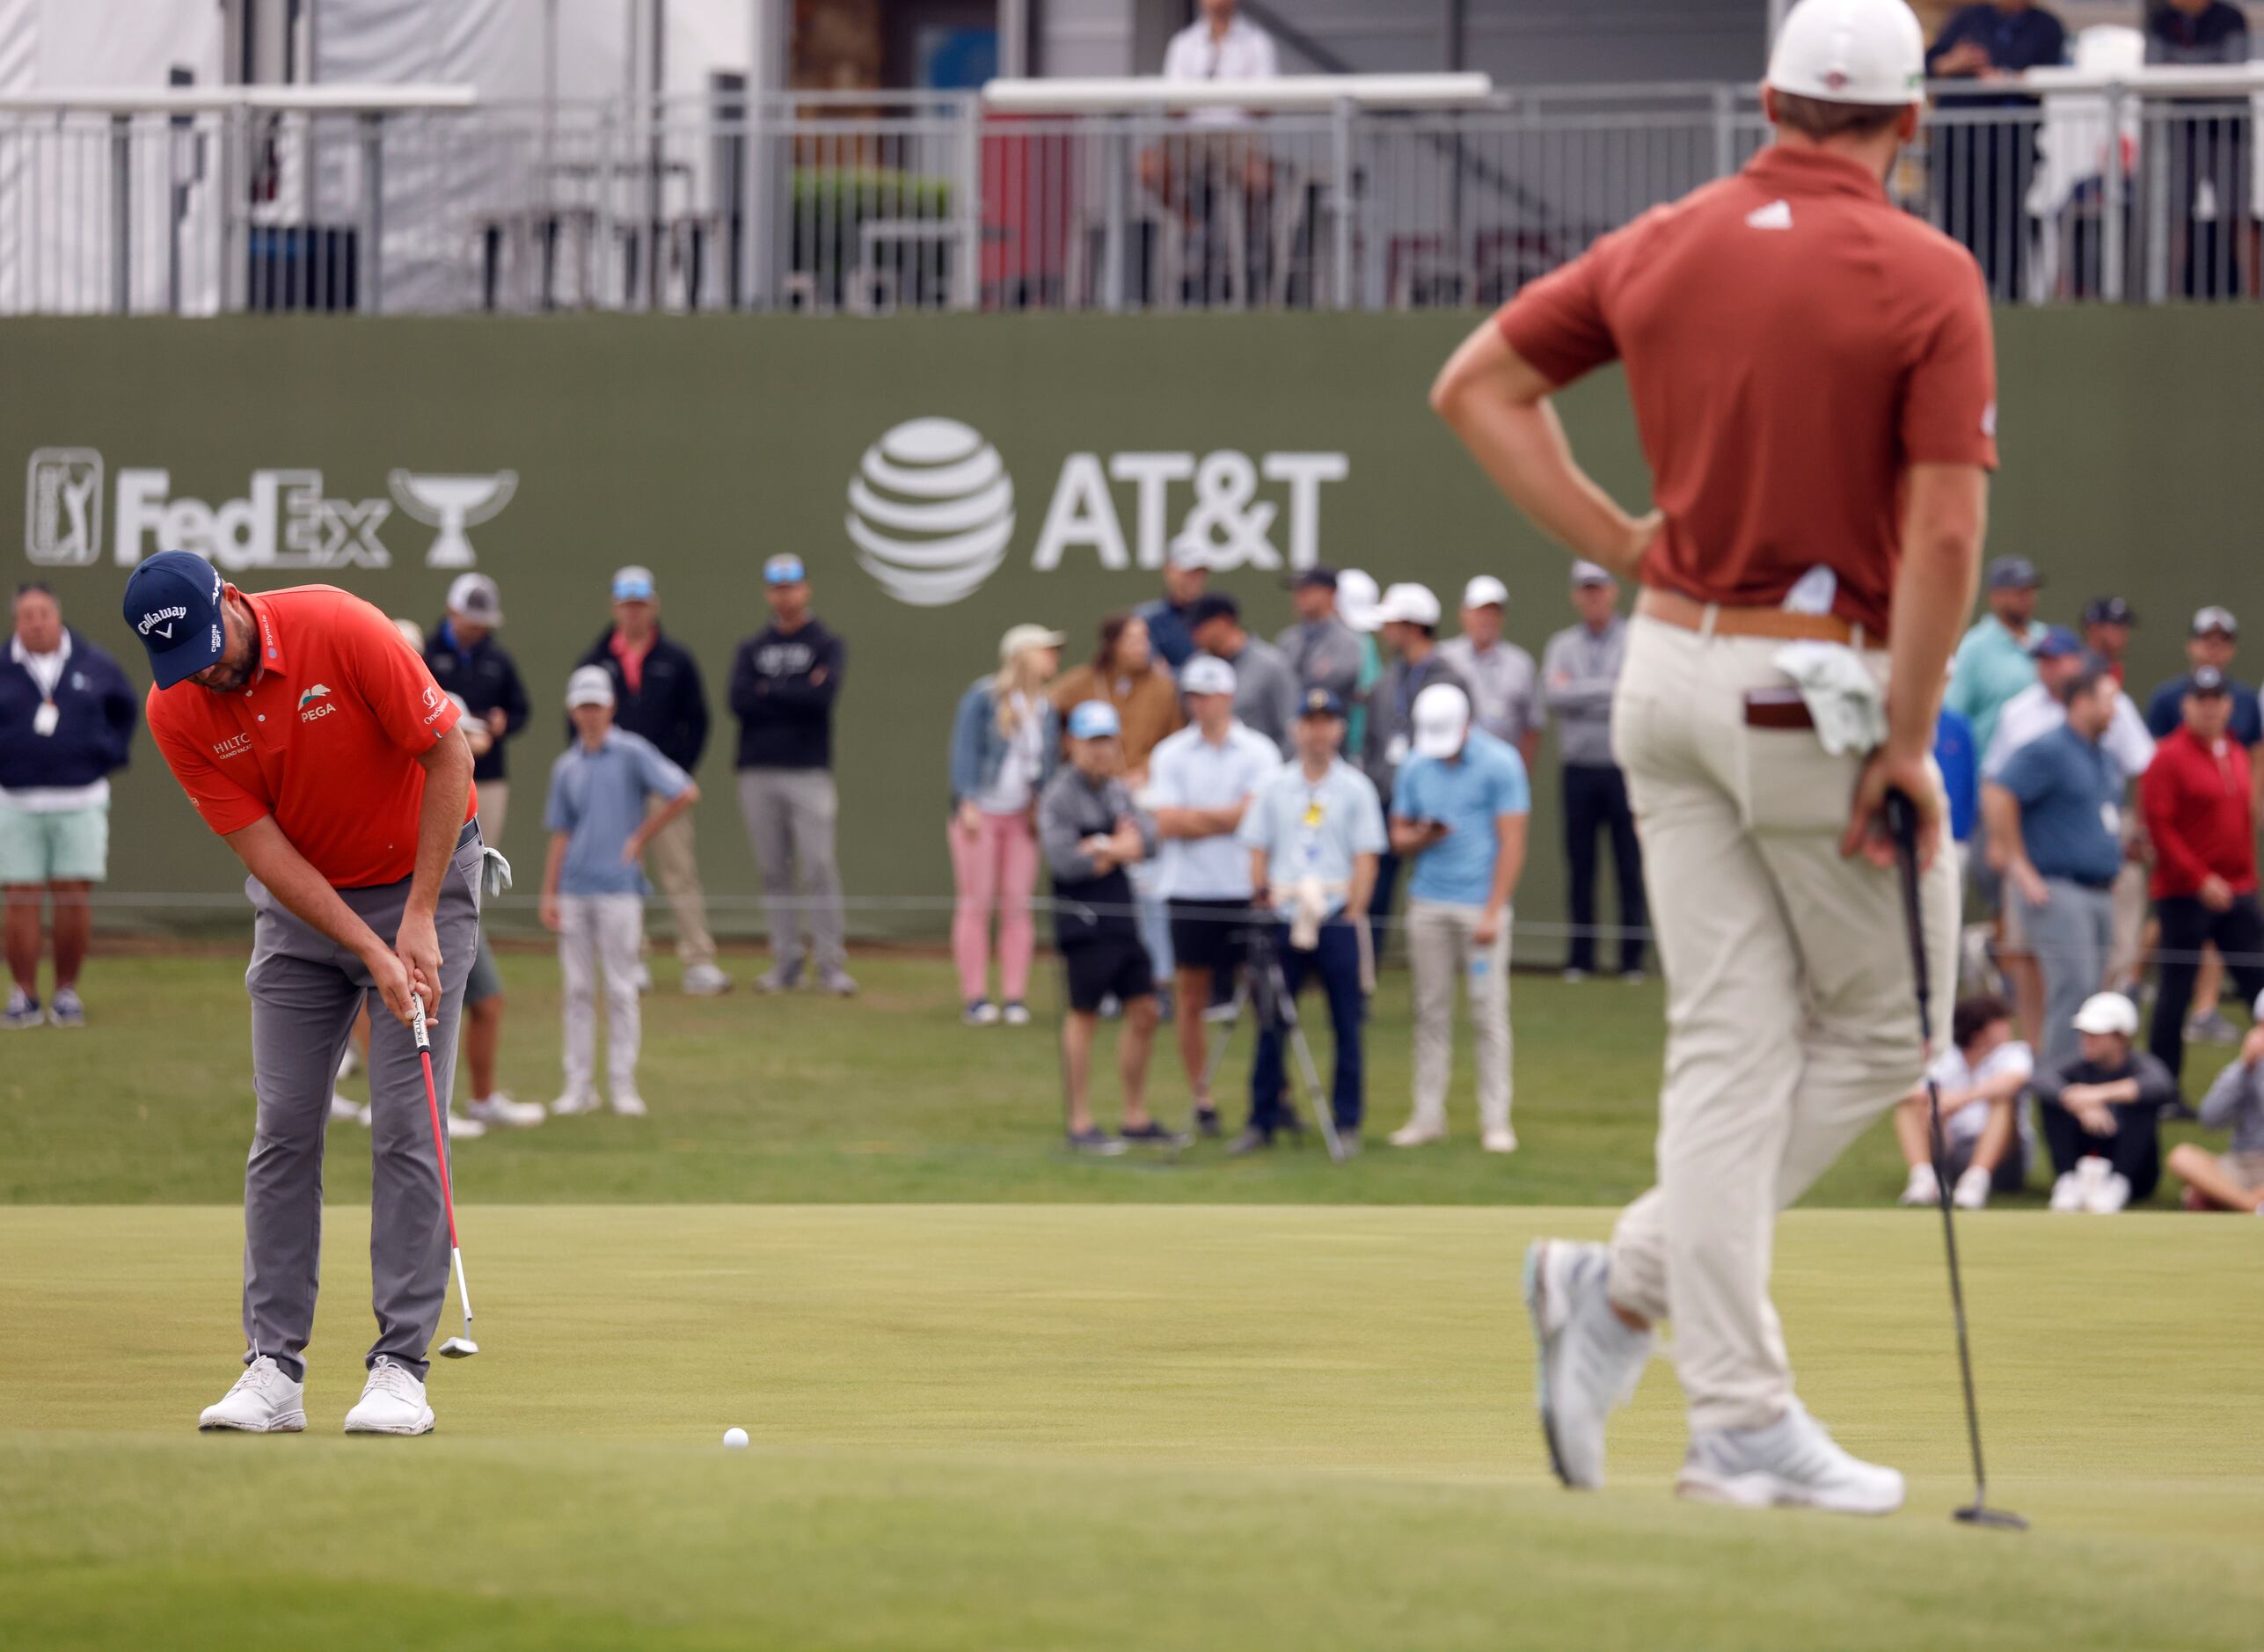 Marc Leishman putts on the 16th hole as Sam Burns watches during round 1 of the AT&T Byron...